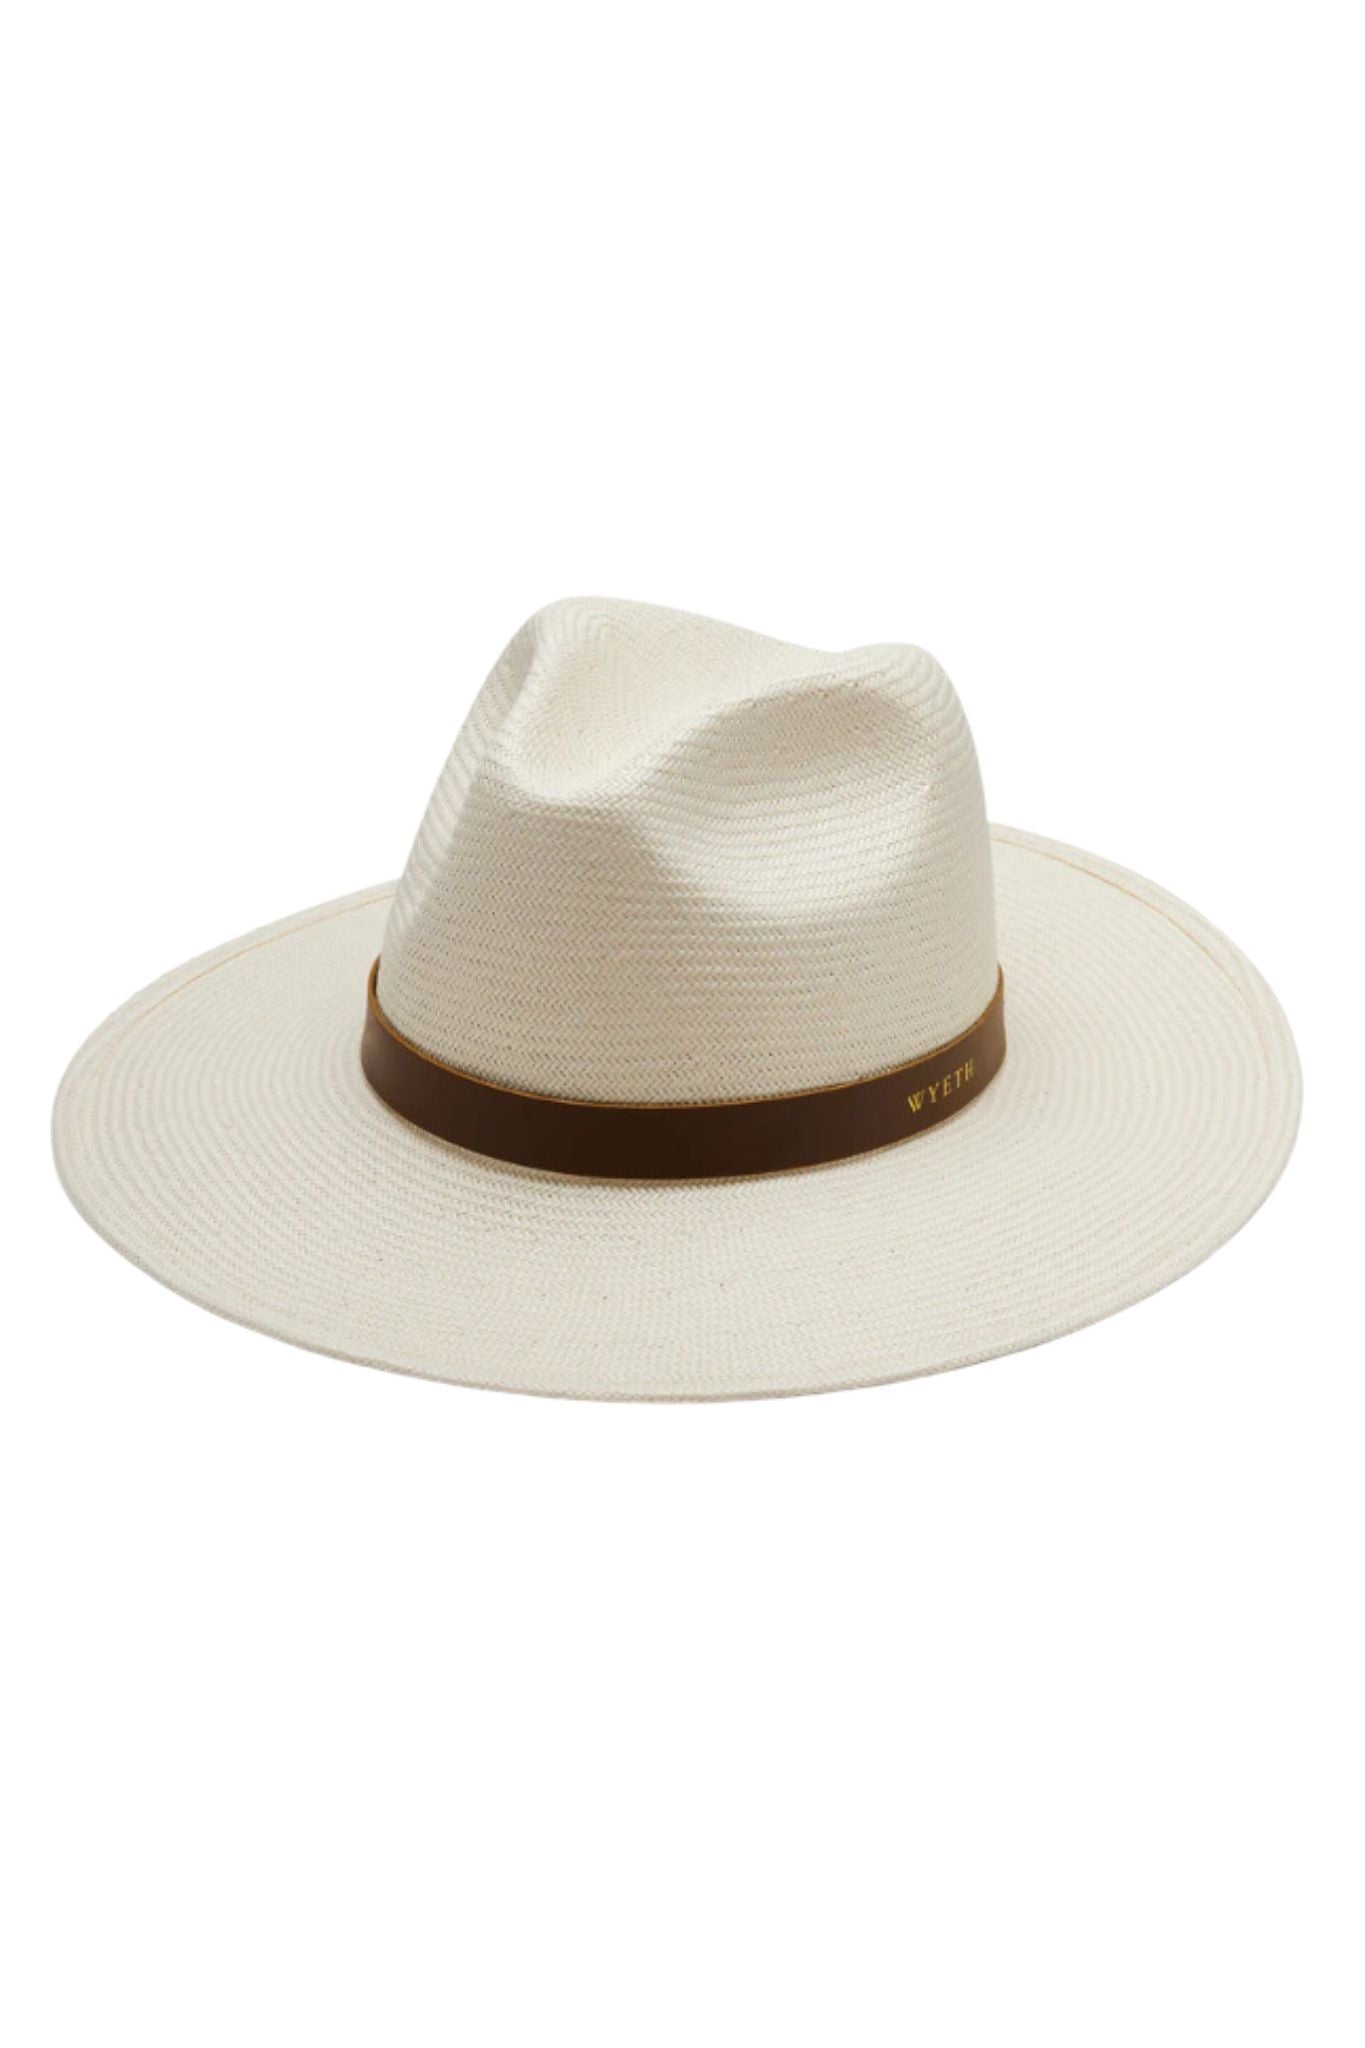 cream straw hat with leather band